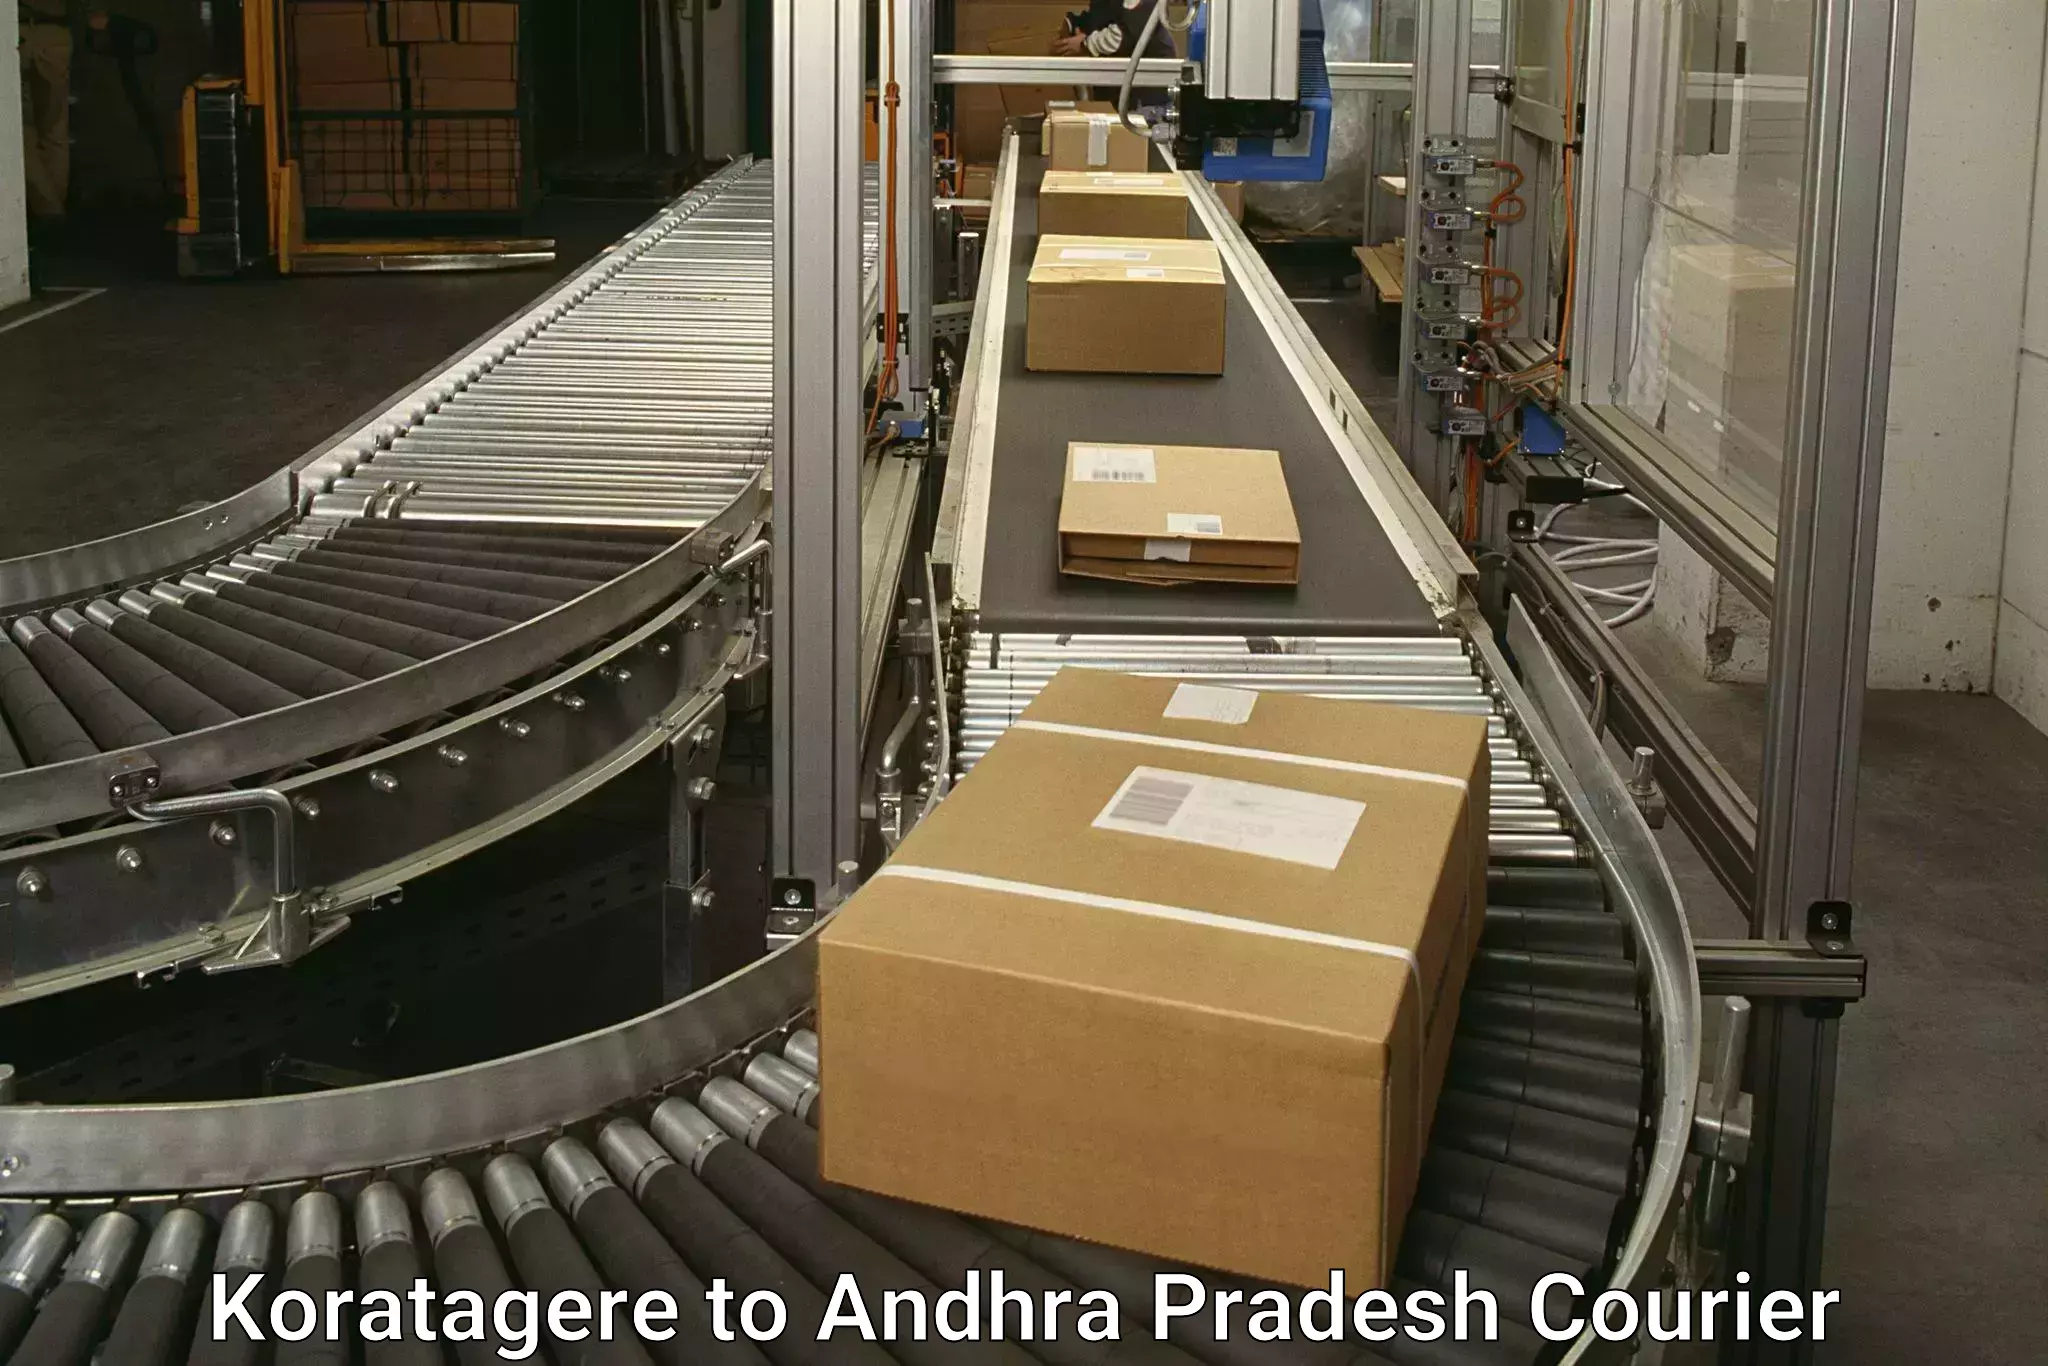 Enhanced tracking features in Koratagere to Andhra Pradesh